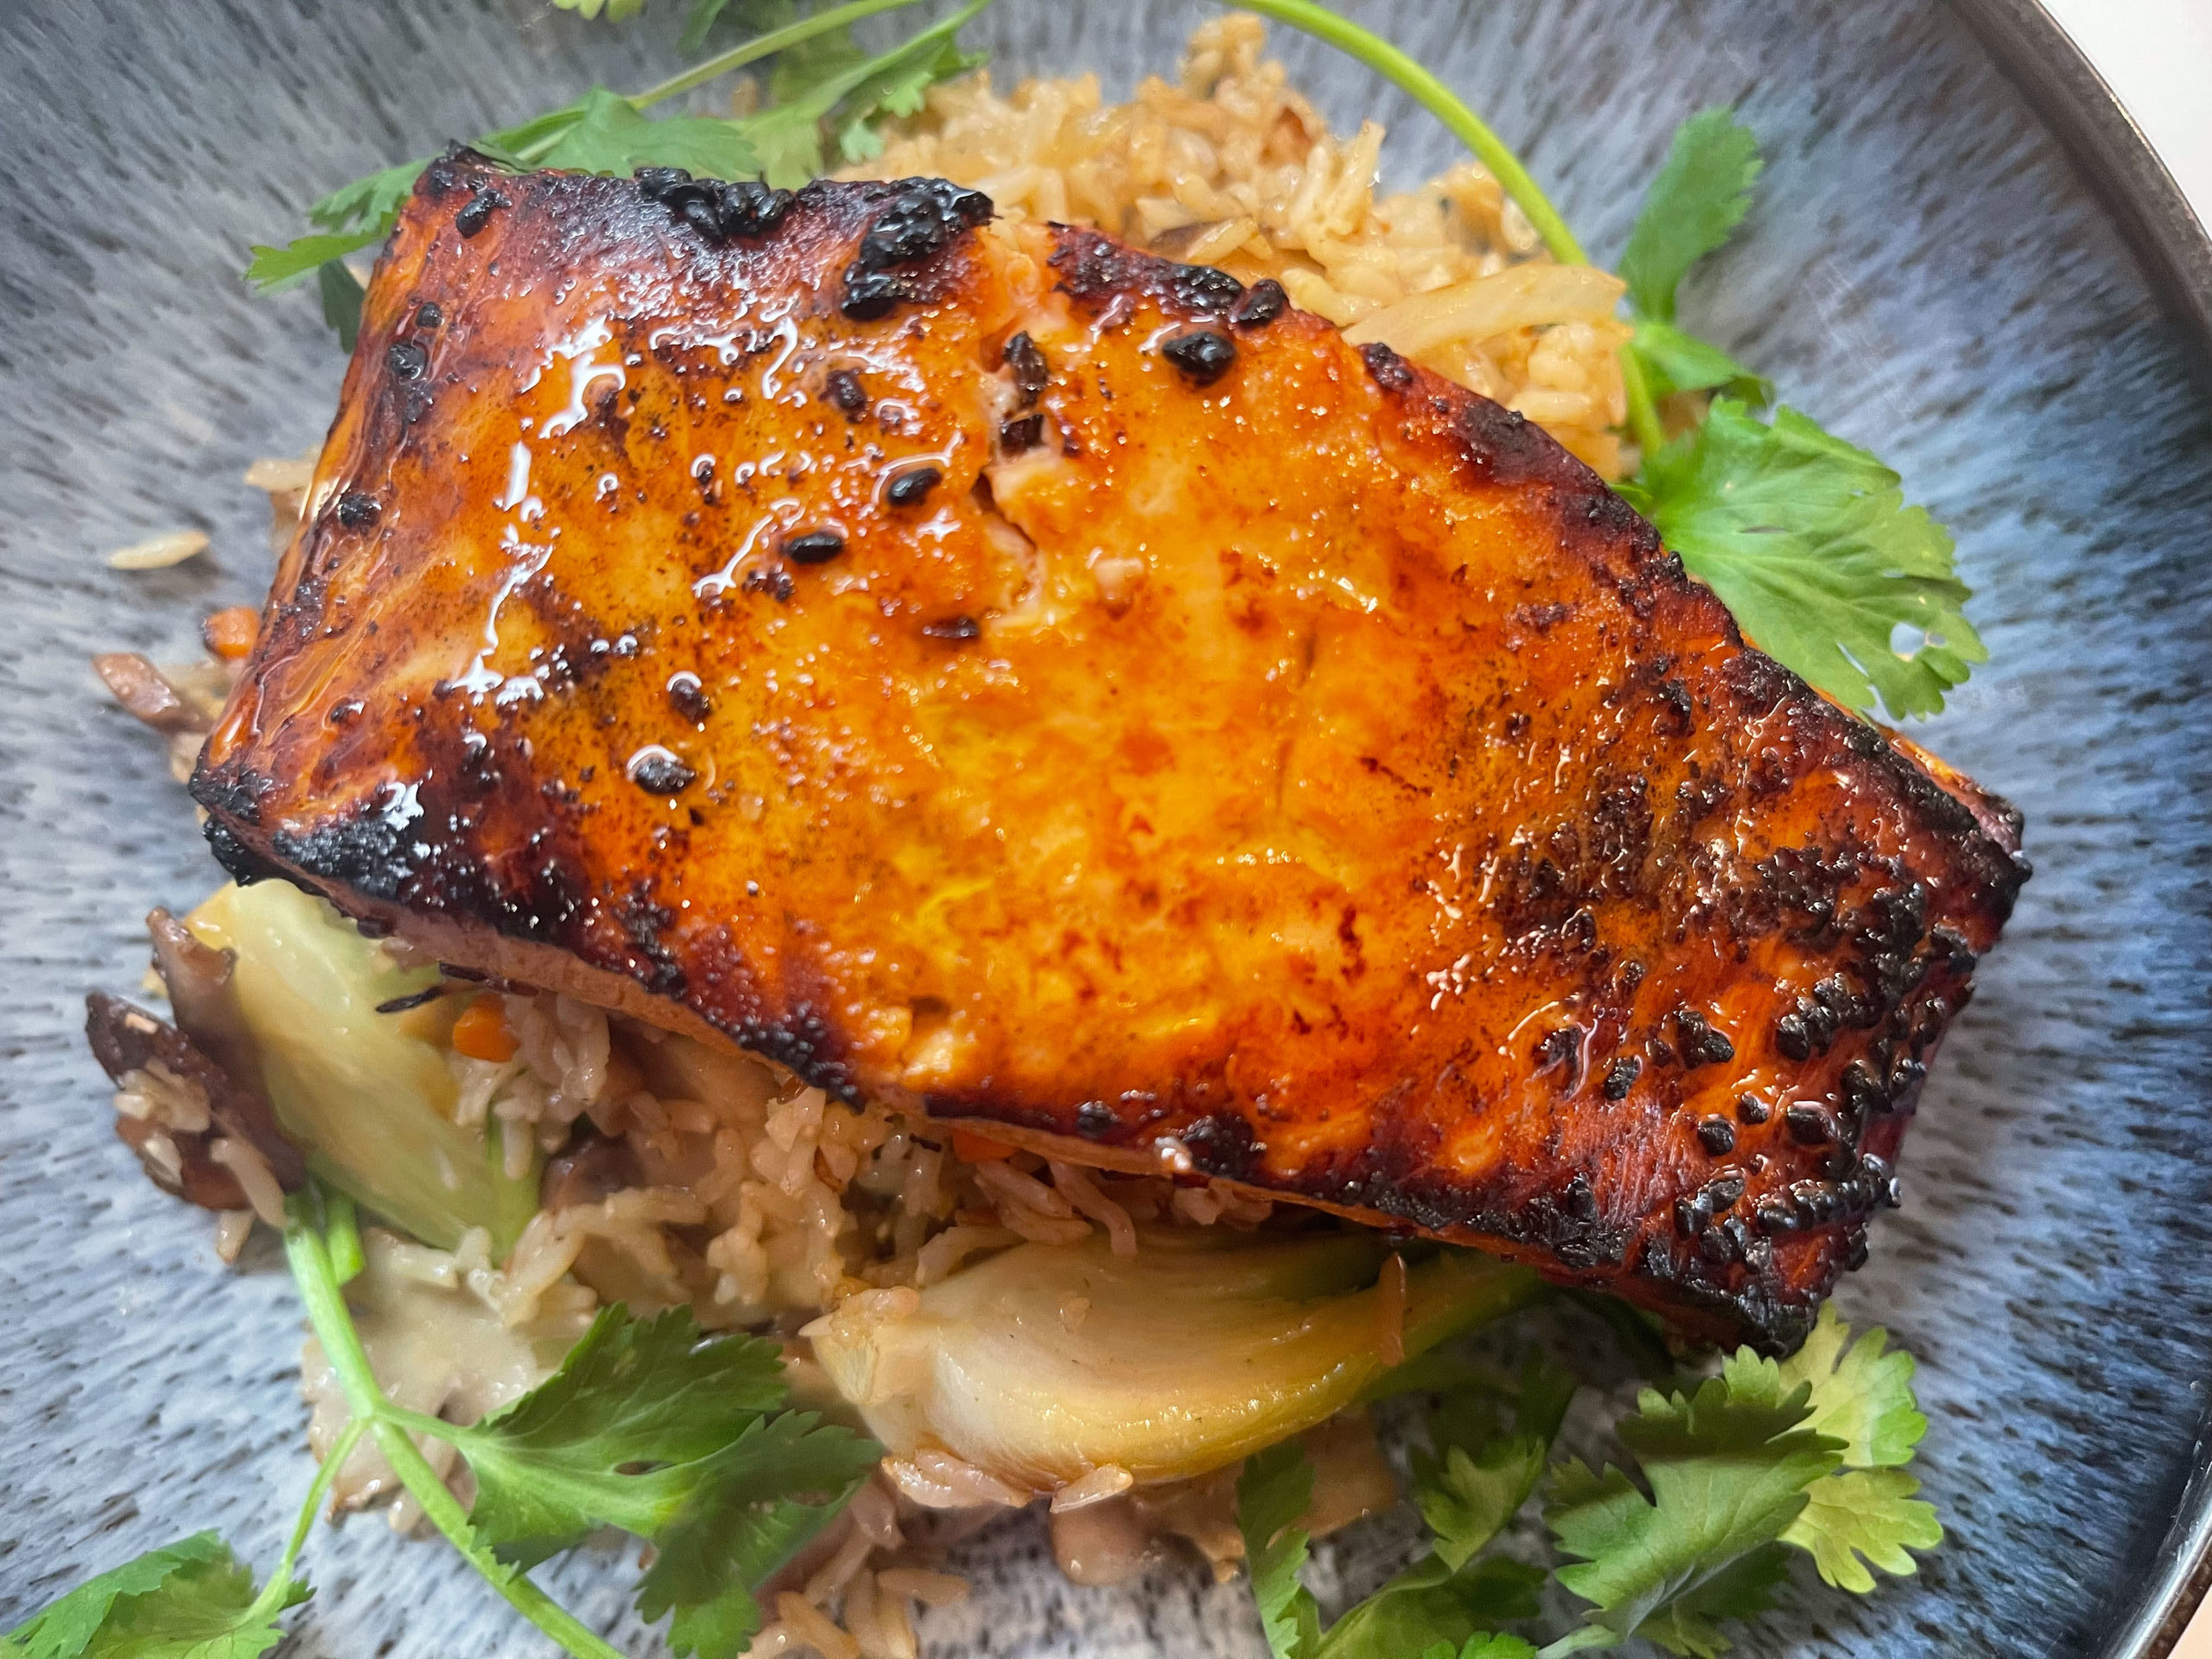 A fillet of Teriyaki Salmon sits on a bed of brown rice and veggies